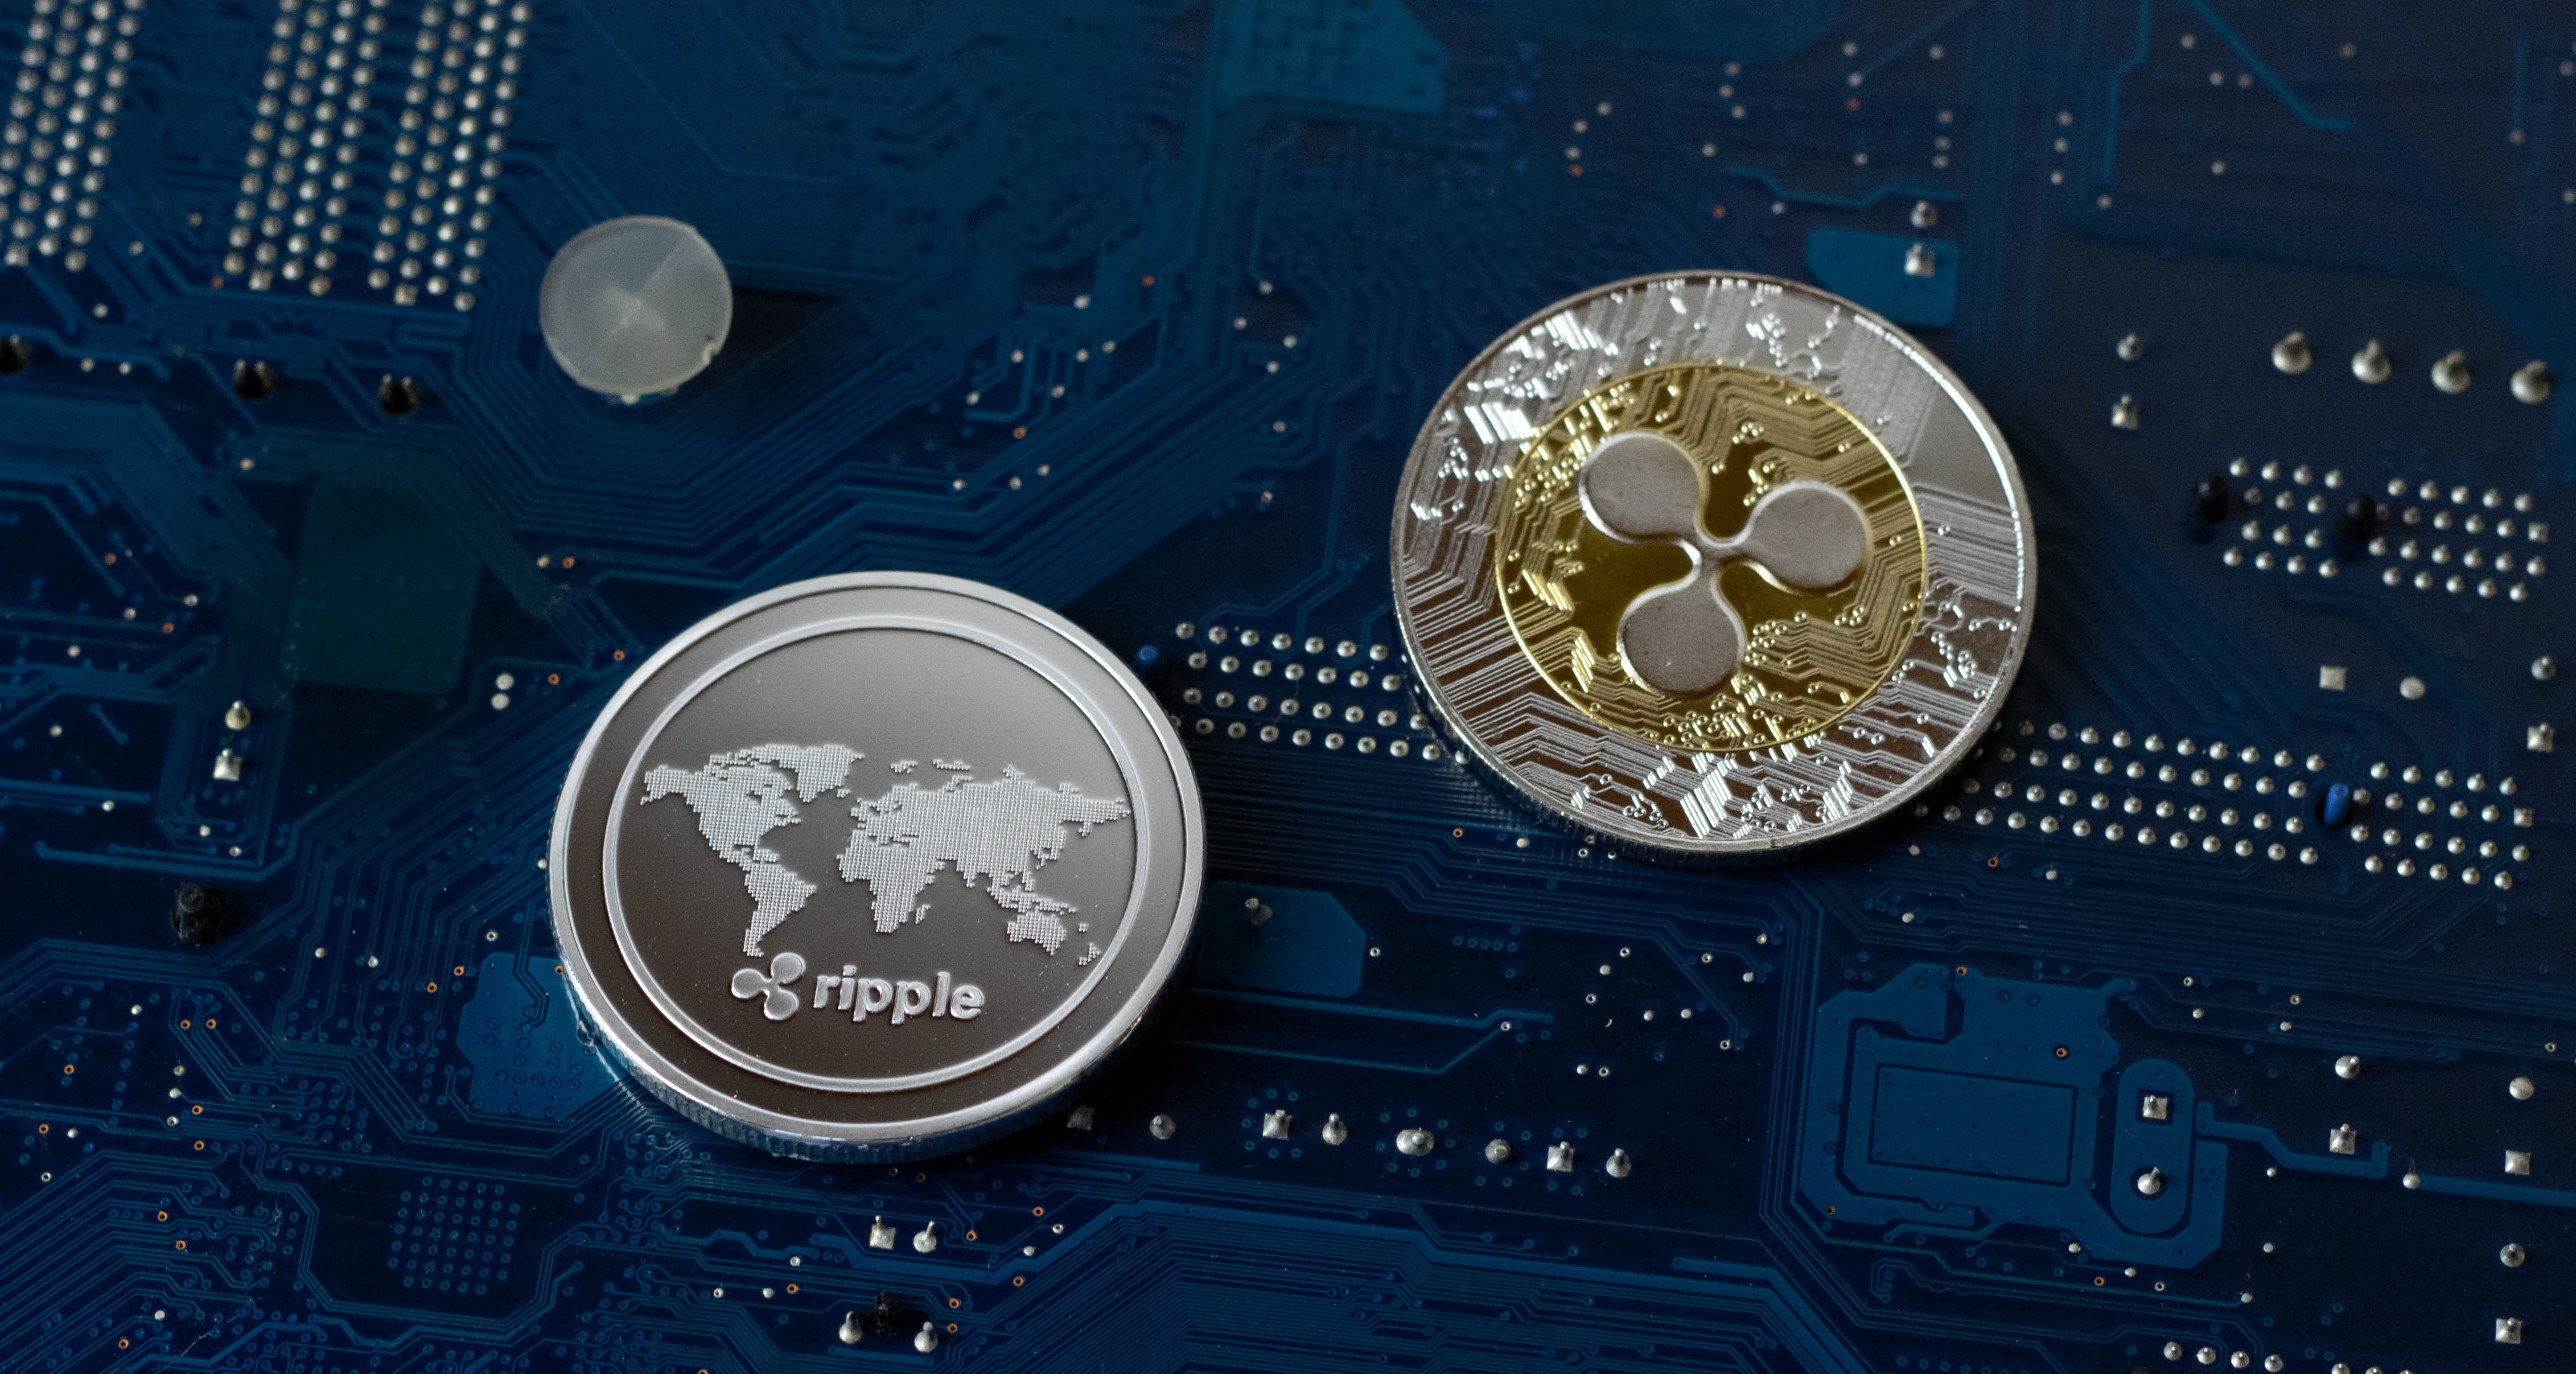 Ripple cryptocurrency owner btc meaning currency